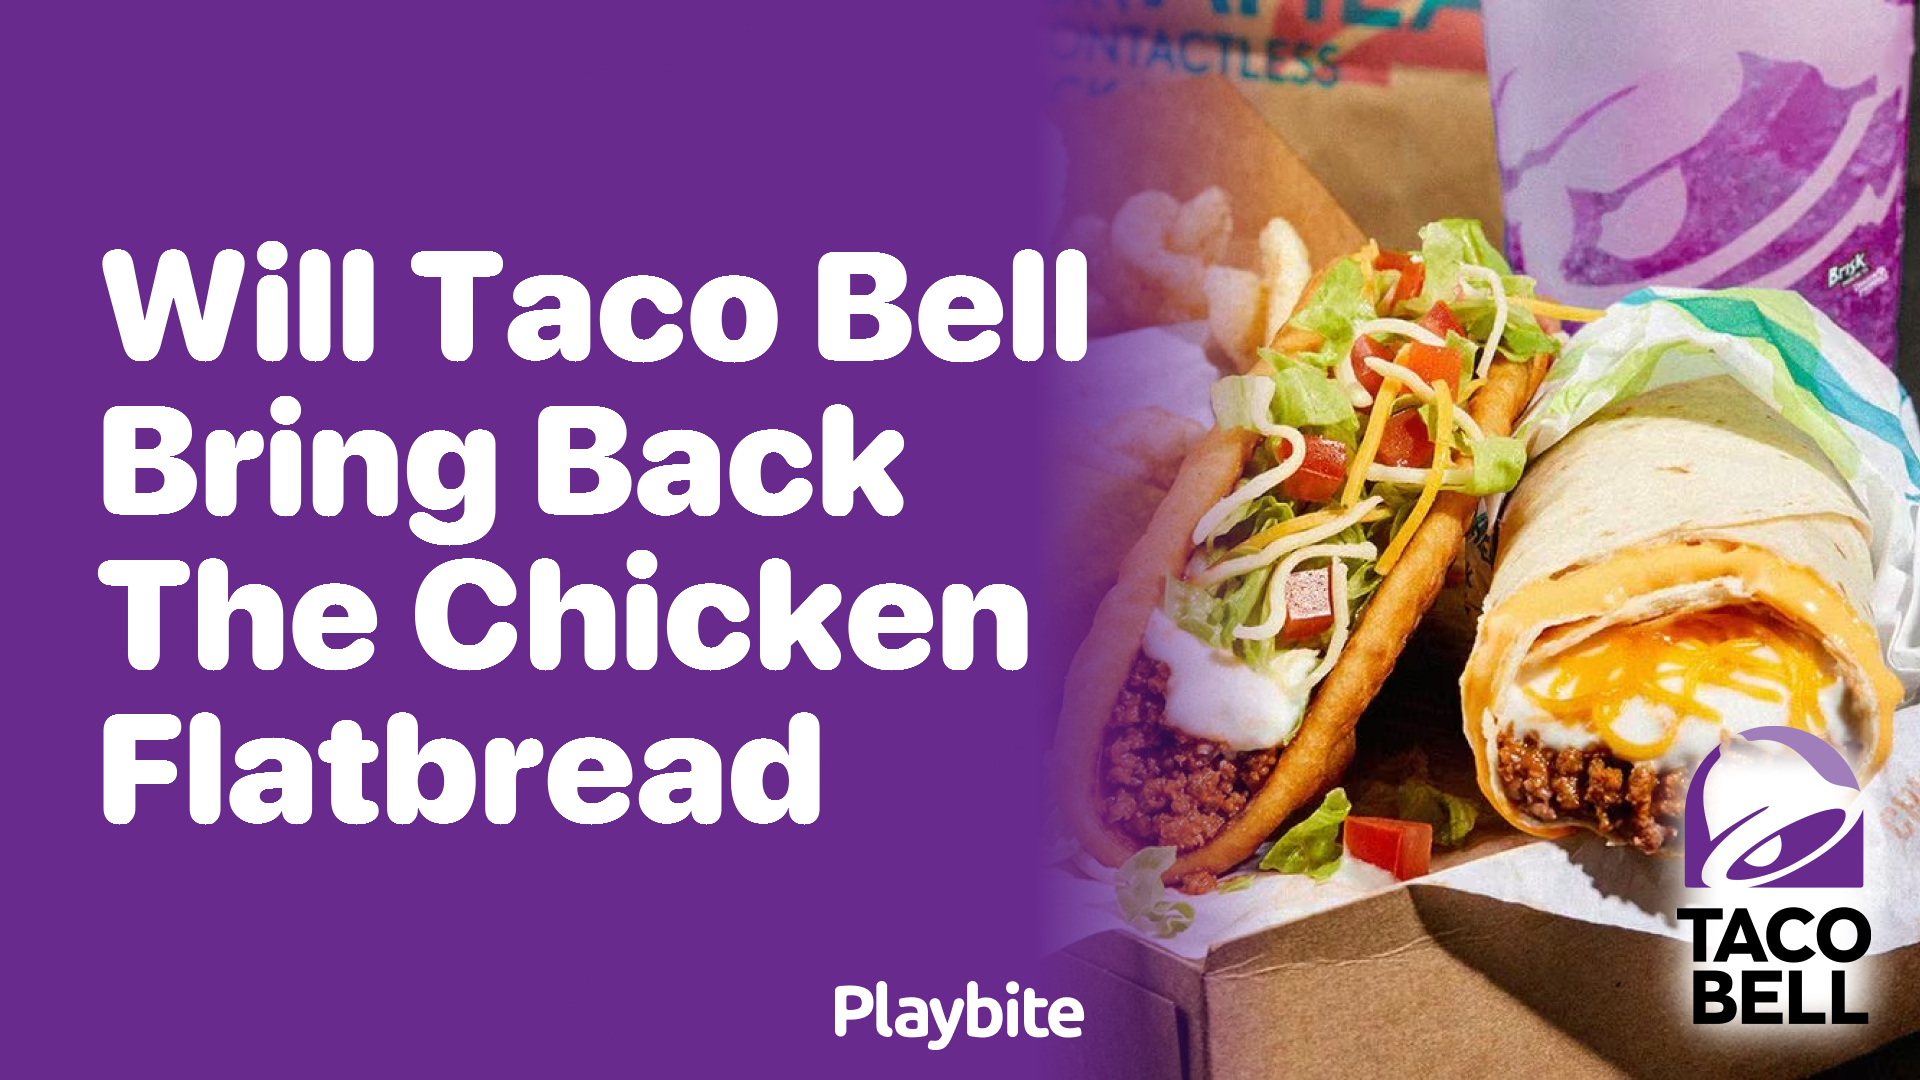 Will Taco Bell Bring Back the Chicken Flatbread?